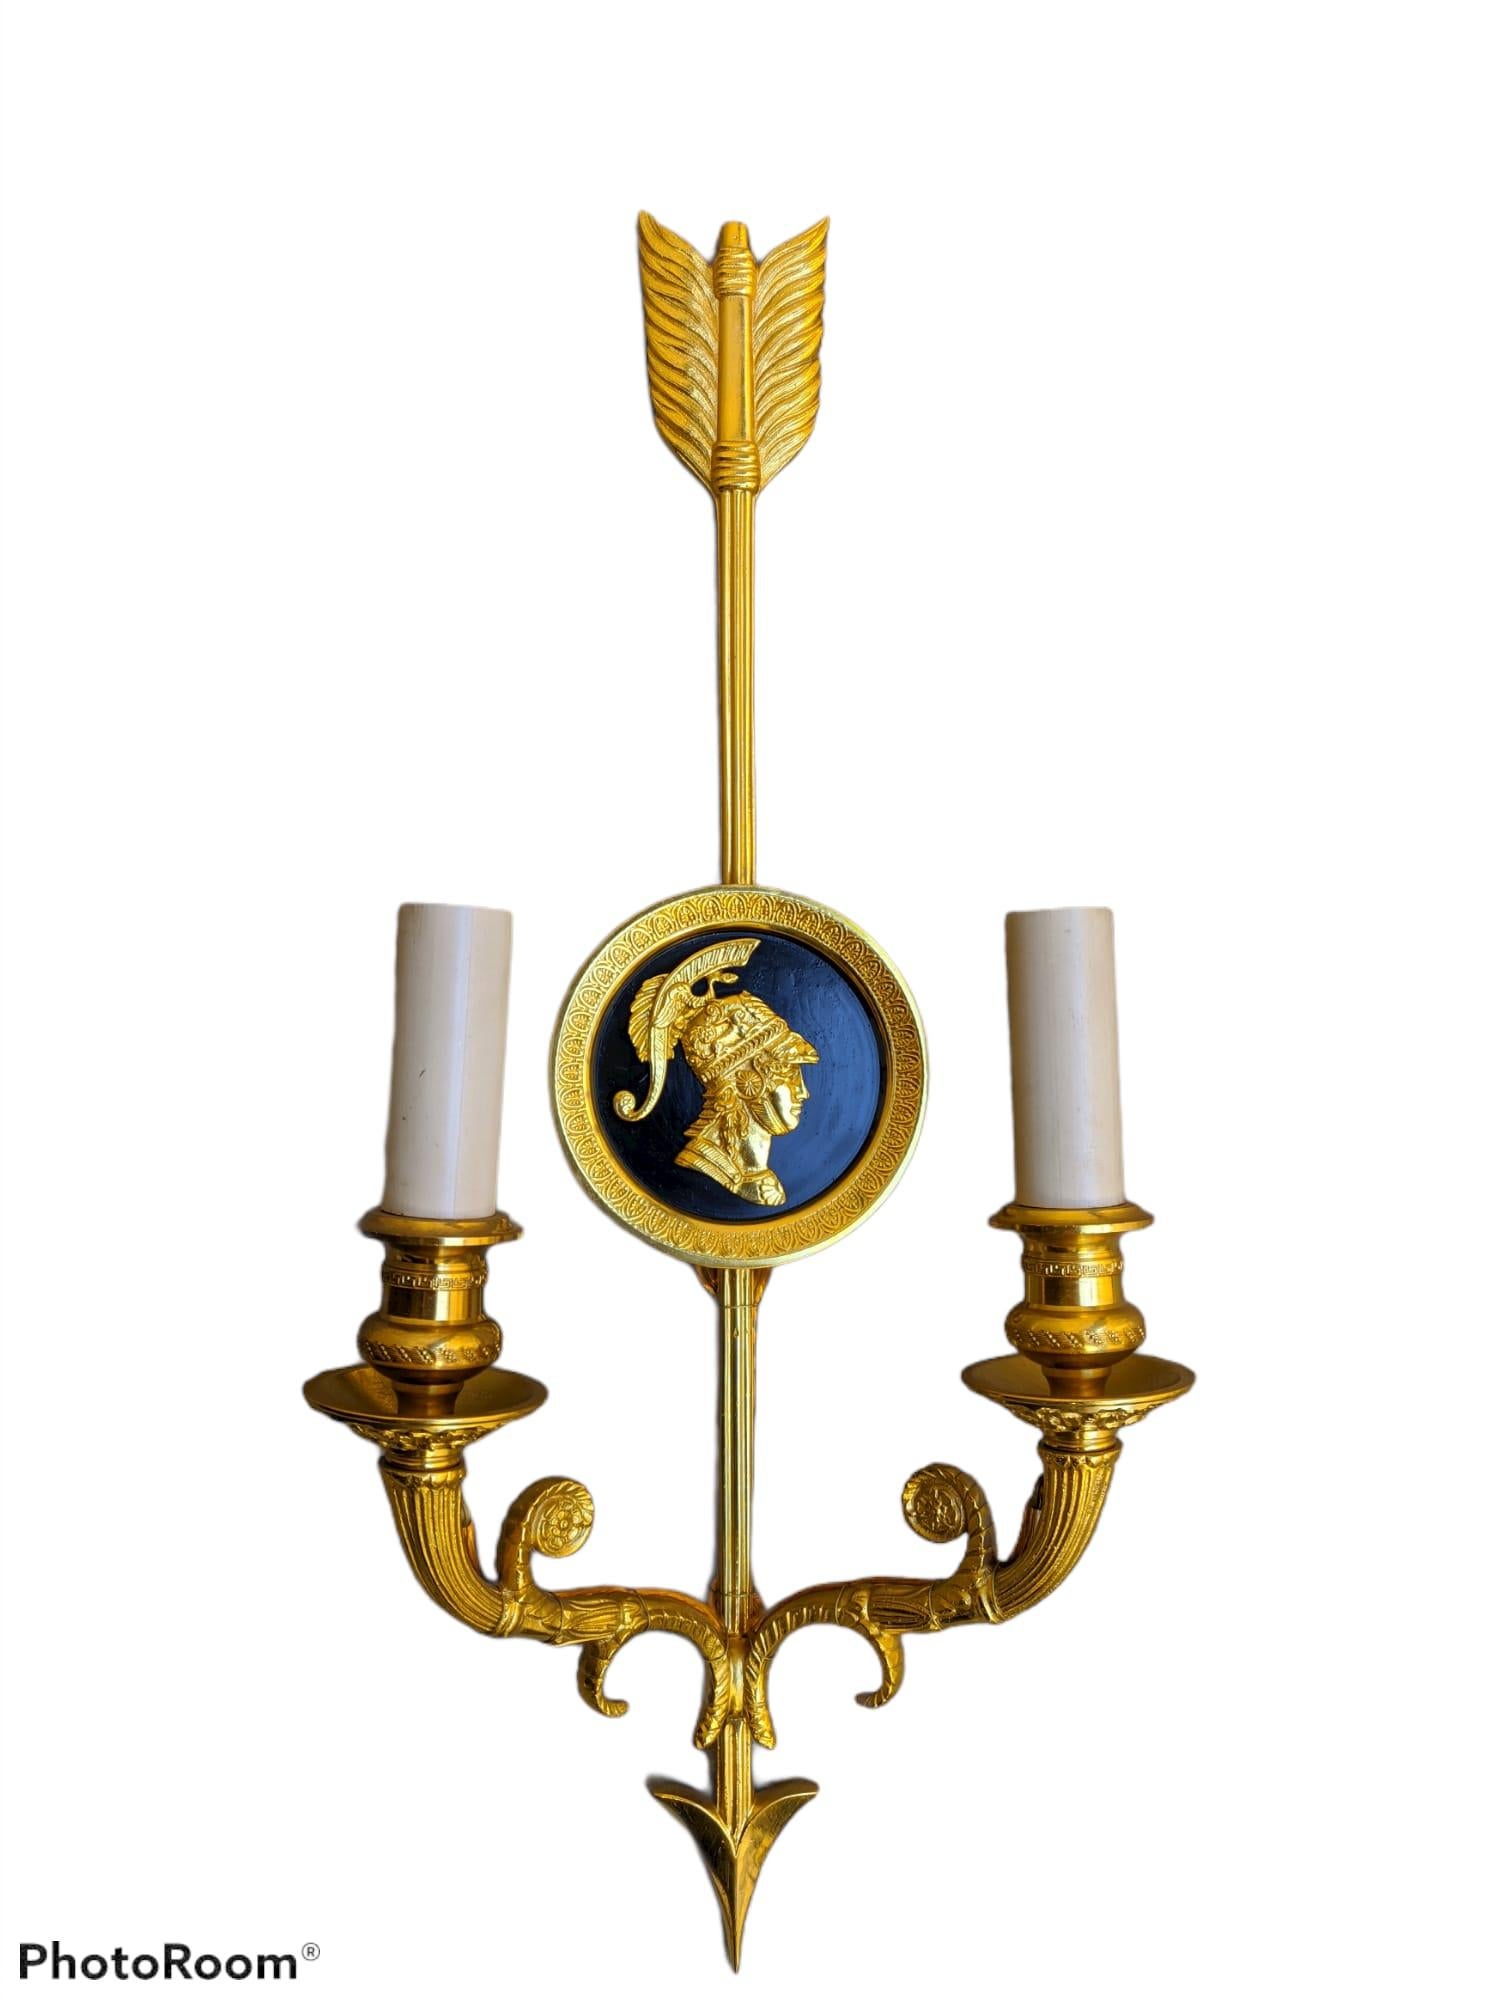 This French Empire style gilt bronze wall sconce by Gherardo Degli Albizzi features the best quality hand-chiselled details.
The backplate of this sconce features a lacquered round plate and an arrow crossing from the top to the bottom. On the